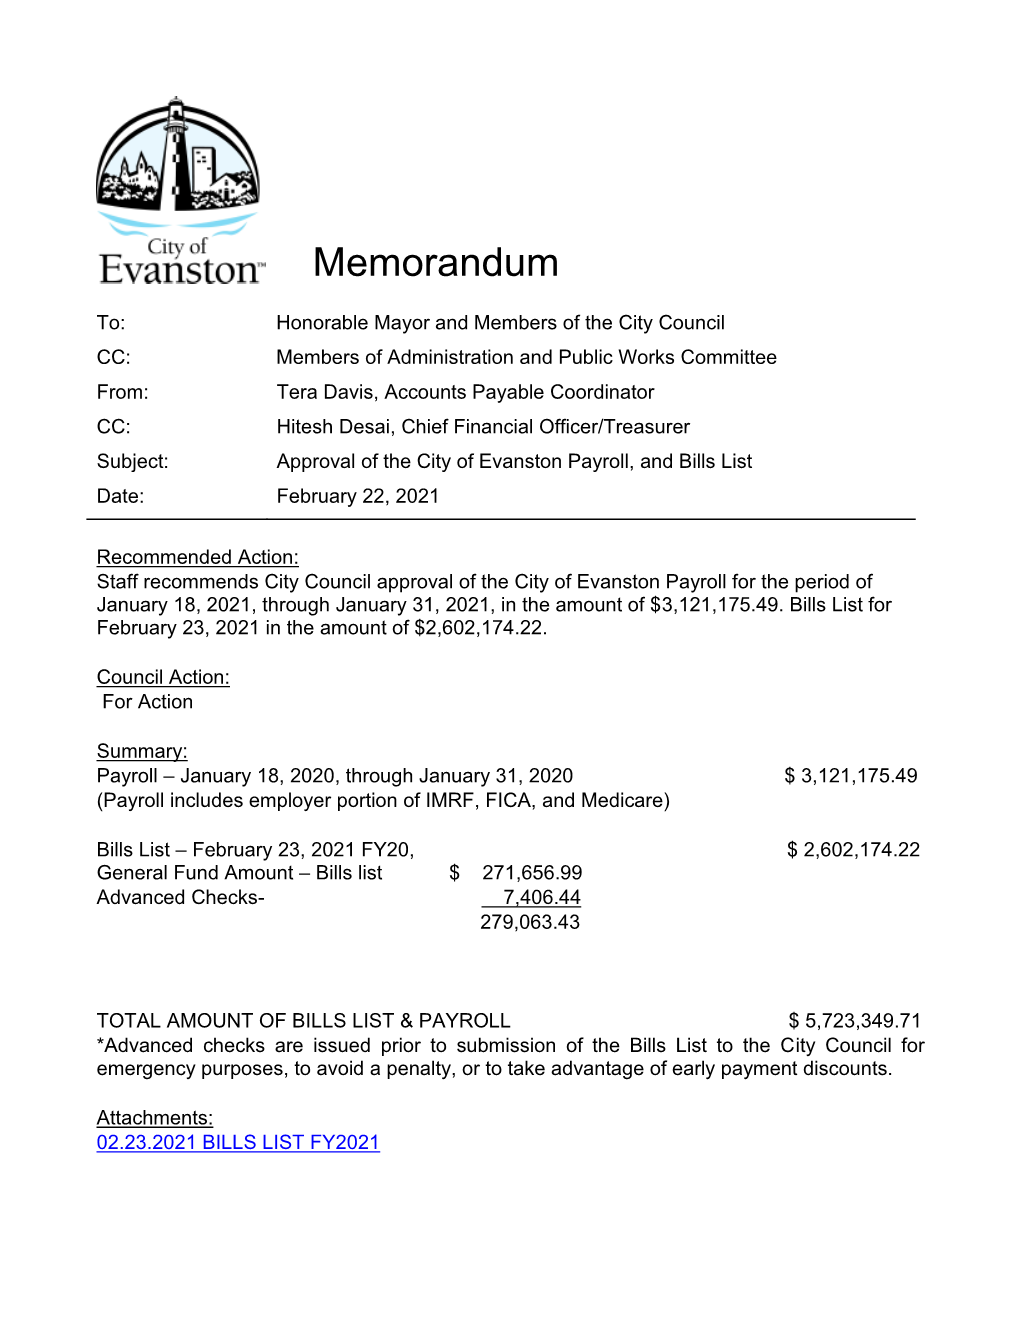 Approval of the City of Evanston Payroll, and Bills List Date: February 22, 2021